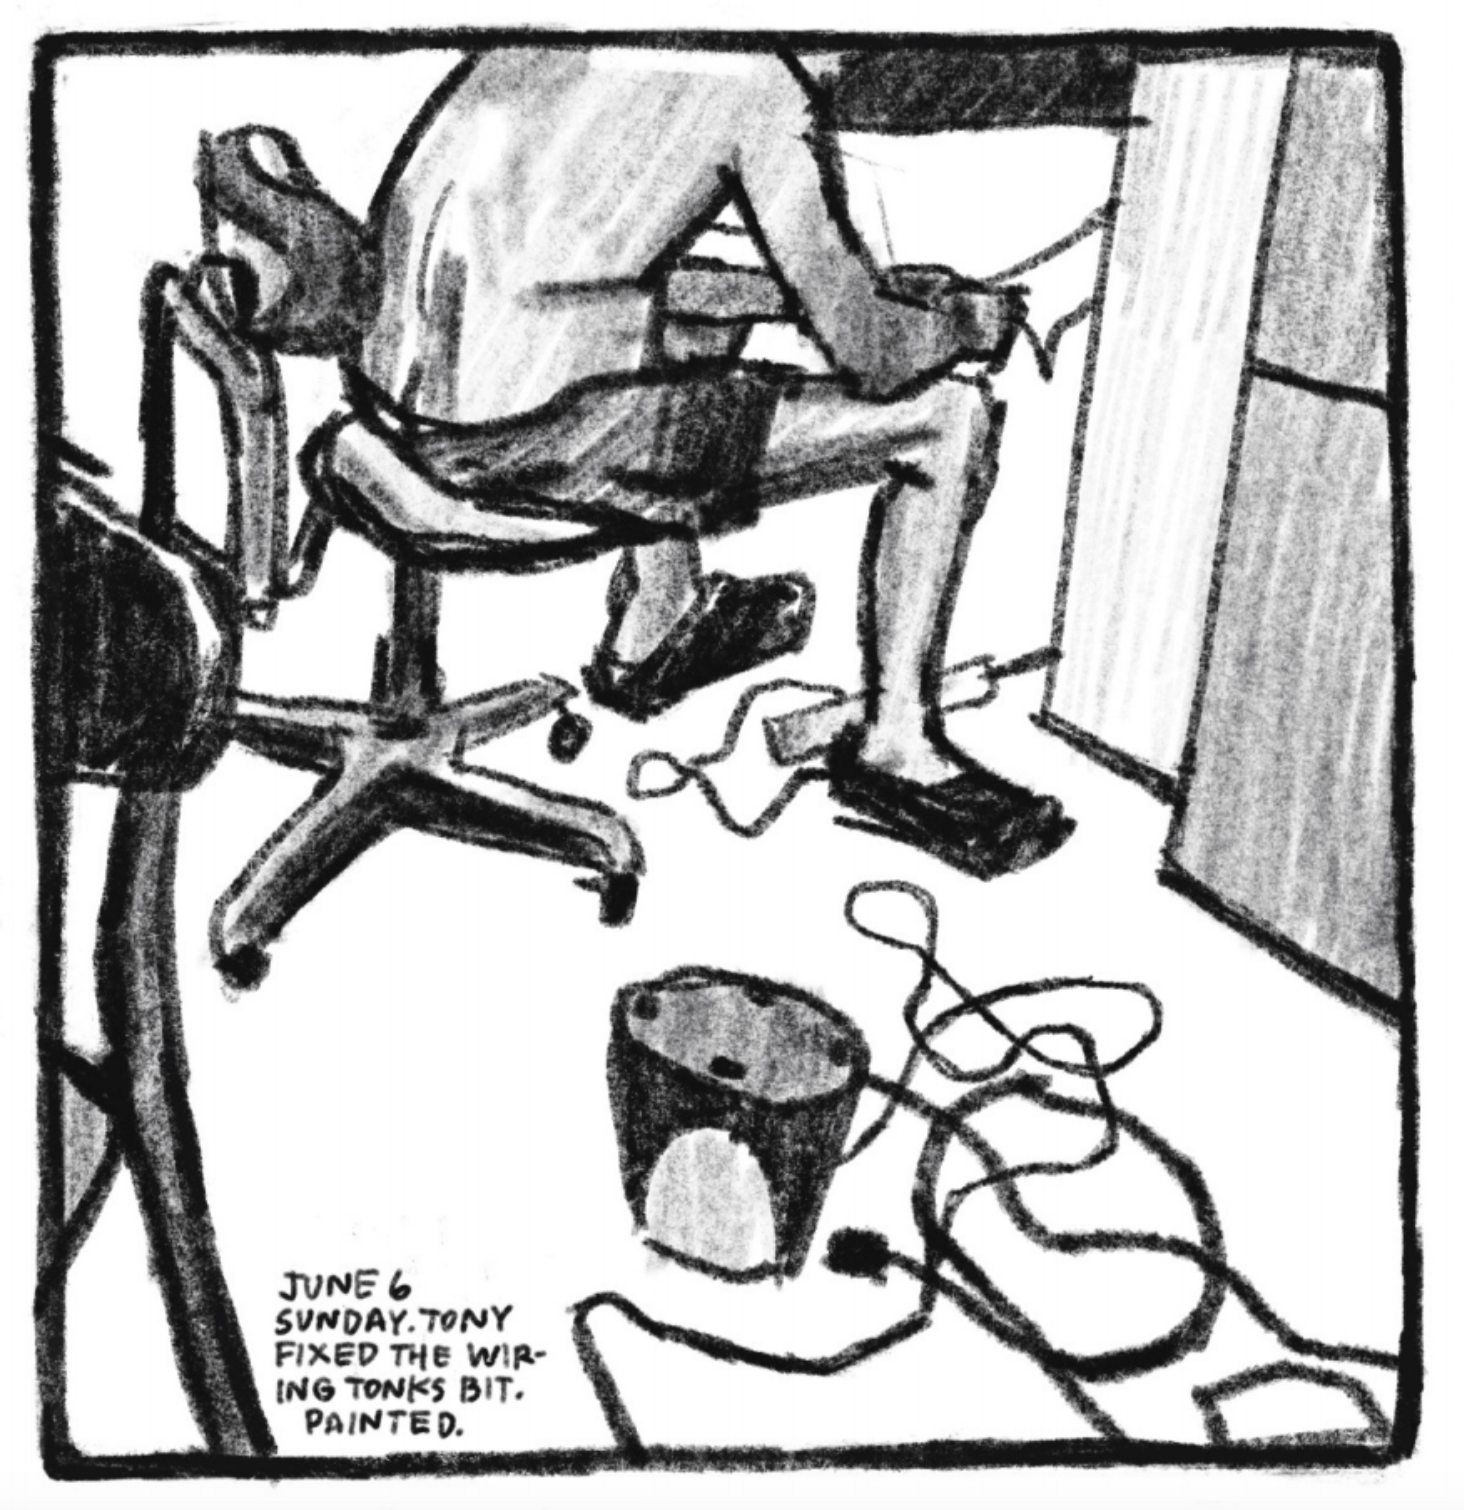 From the shoulders down, we see a man sitting on an office swivel chair, bending down slightly to work on some wires coming out of a cabinet. There are more wires on the floor, attached to a modem or something of the sort.

"June 6. Sunday. Tony fixed the wiring tonks bit. Painted."